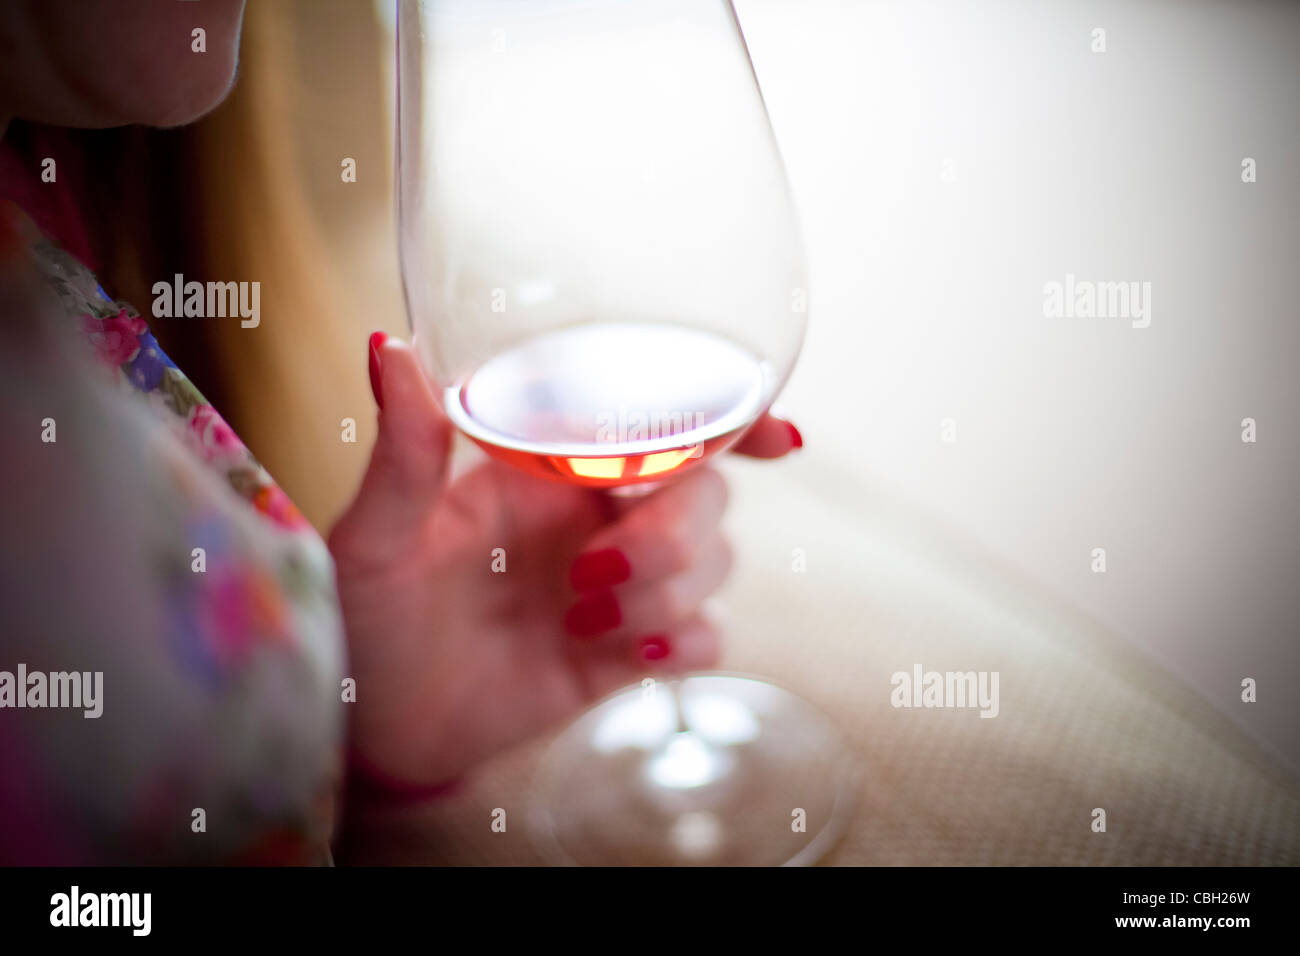 Woman holding a glass of rose wine. Sun is reflected off the glass and wine. Stock Photo